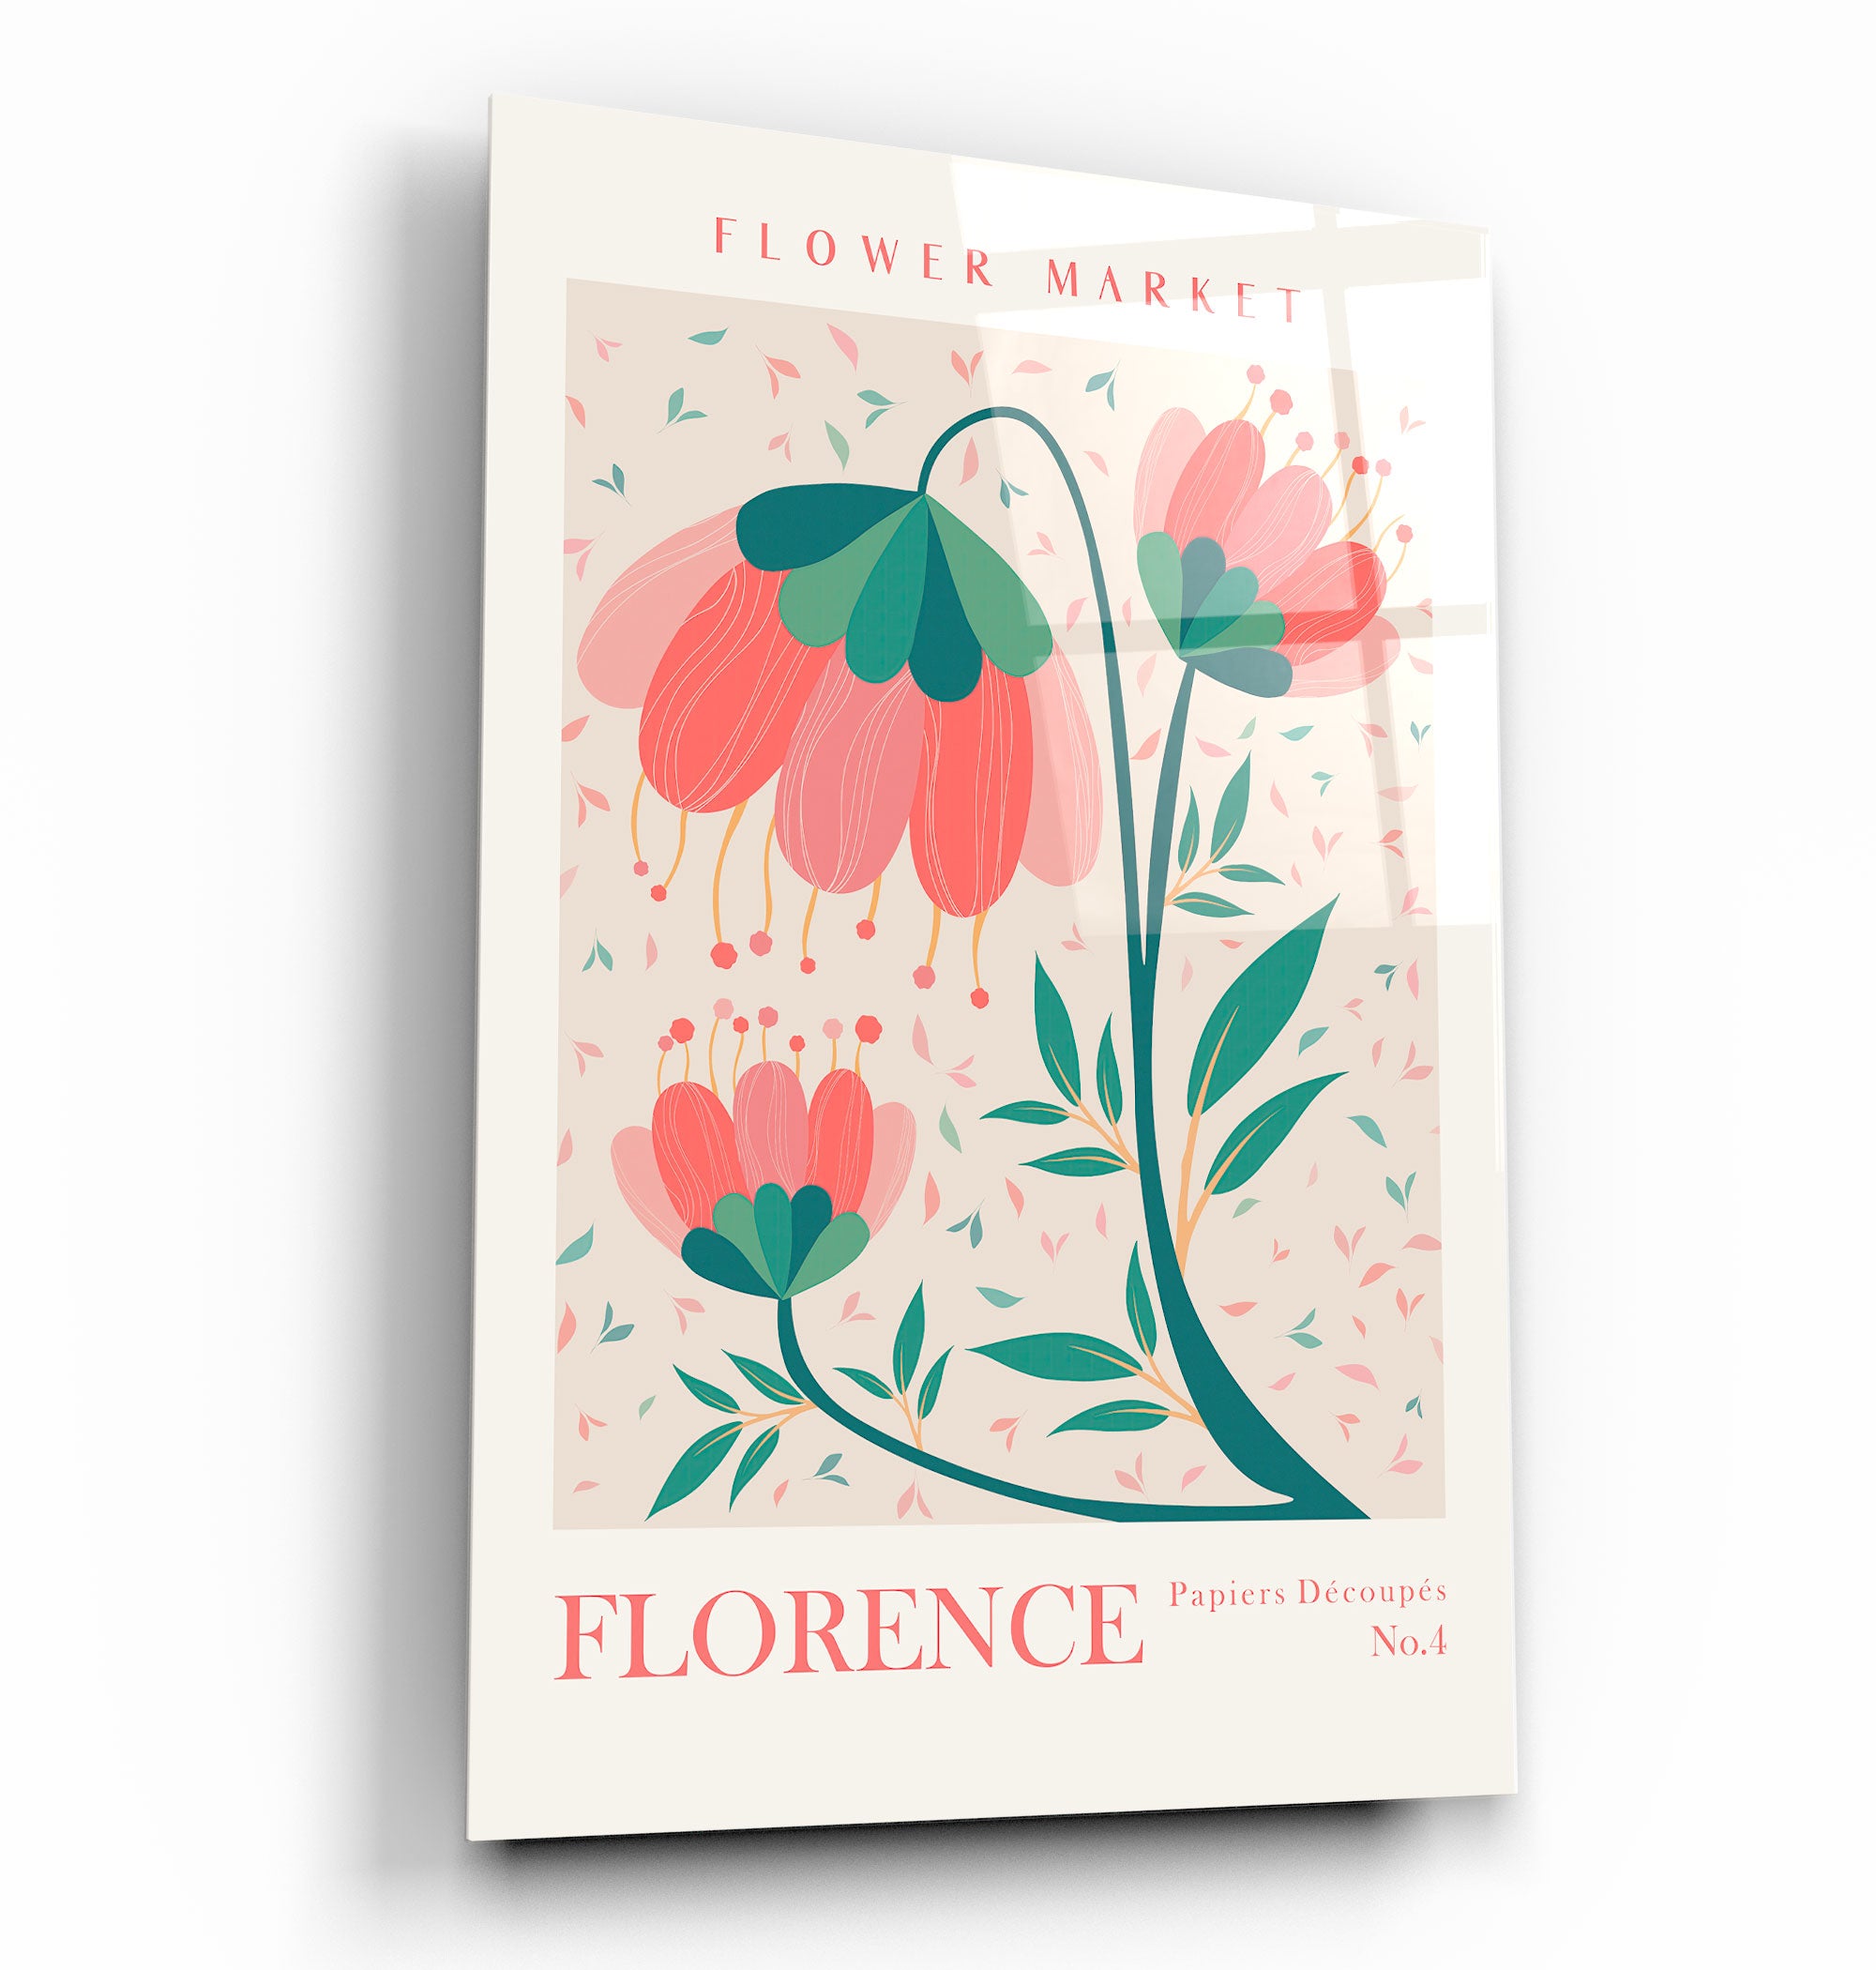 ・"Flower Market No:4 Florence"・Gallery Print Collection Glass Wall Art